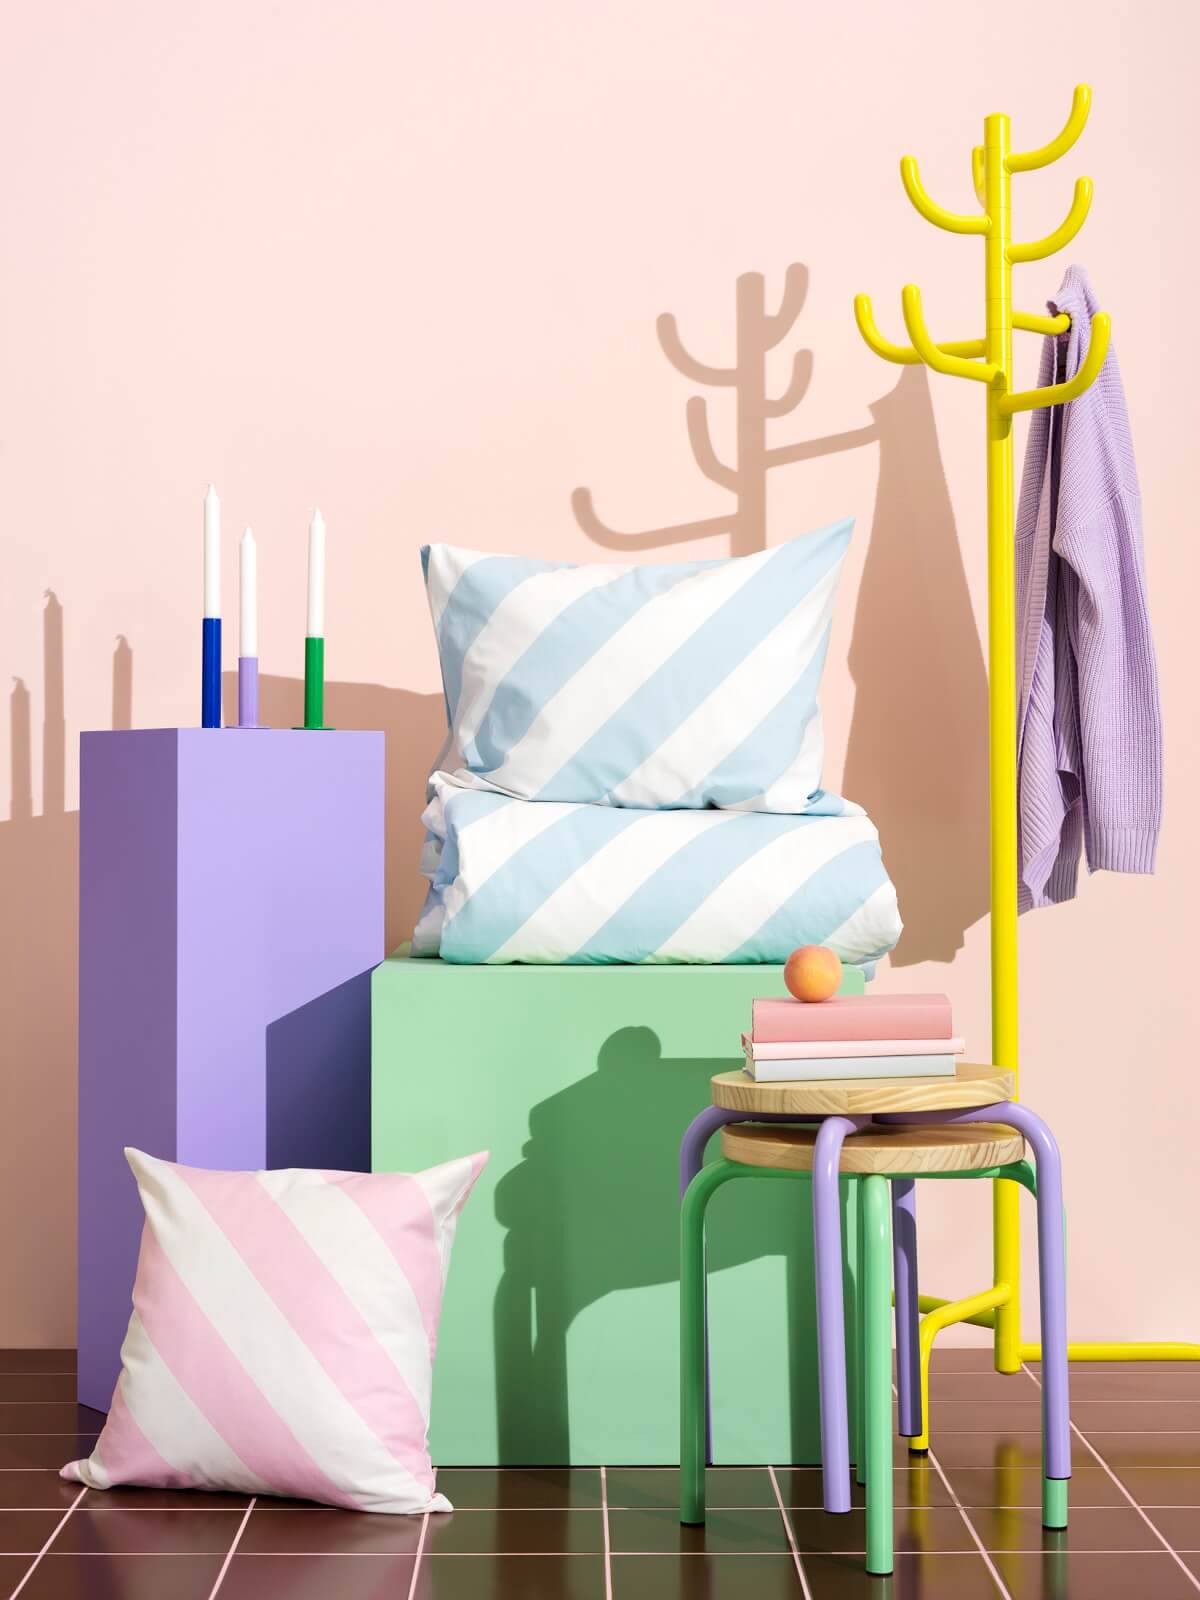 IKEA Nytillverkad Collection: A Fresh Look for Iconic IKEA Designs